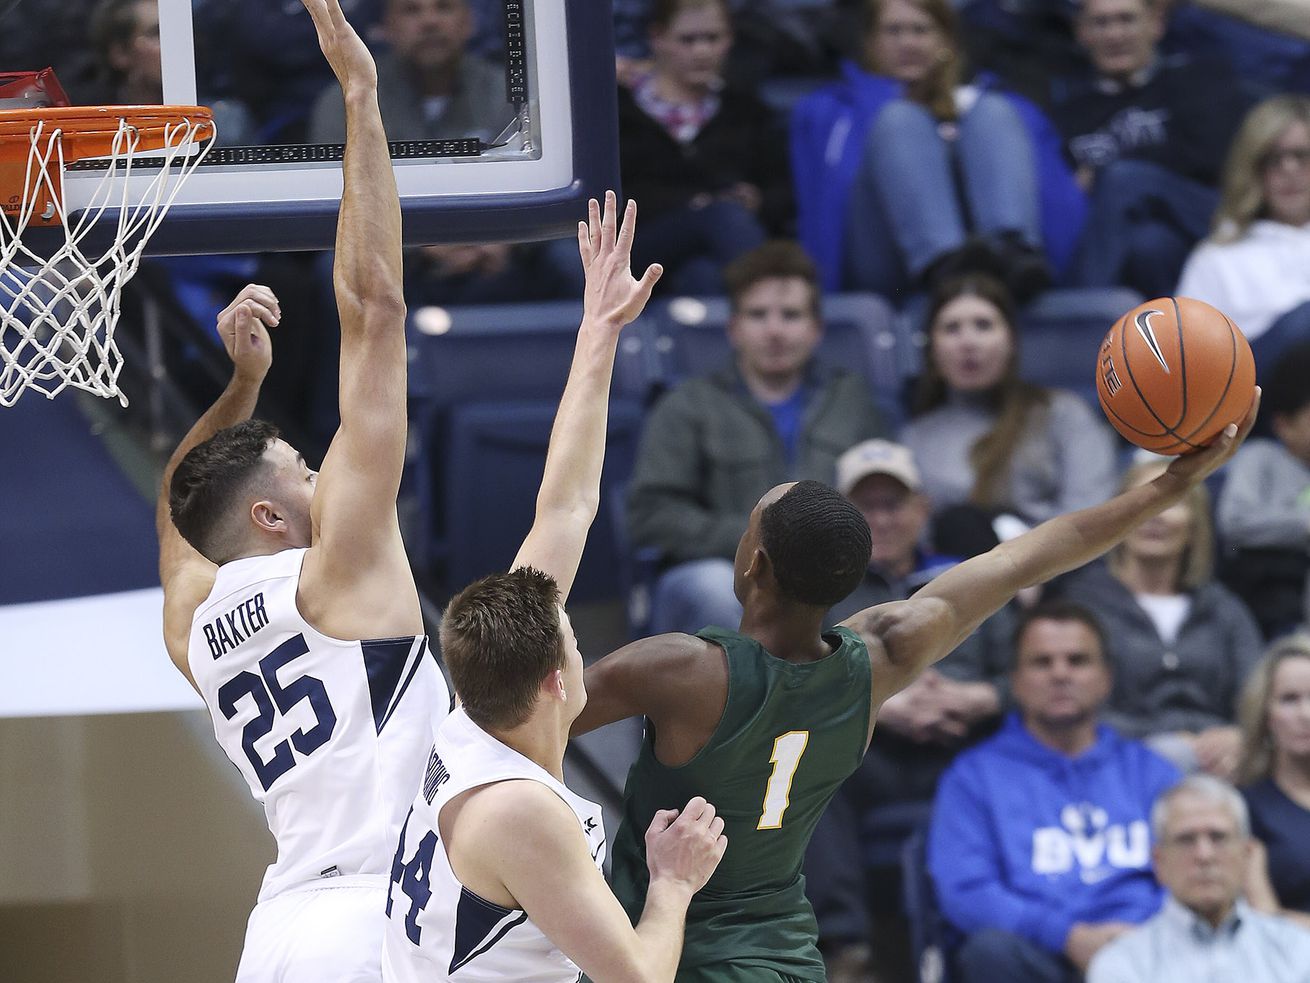 San Francisco Dons guard Jamaree Bouyea (1) tries to drive on Brigham Young Cougars guard Connor Harding (44) and Brigham Young Cougars forward Gavin Baxter (25) in Provo on Saturday, Feb. 8, 2020.